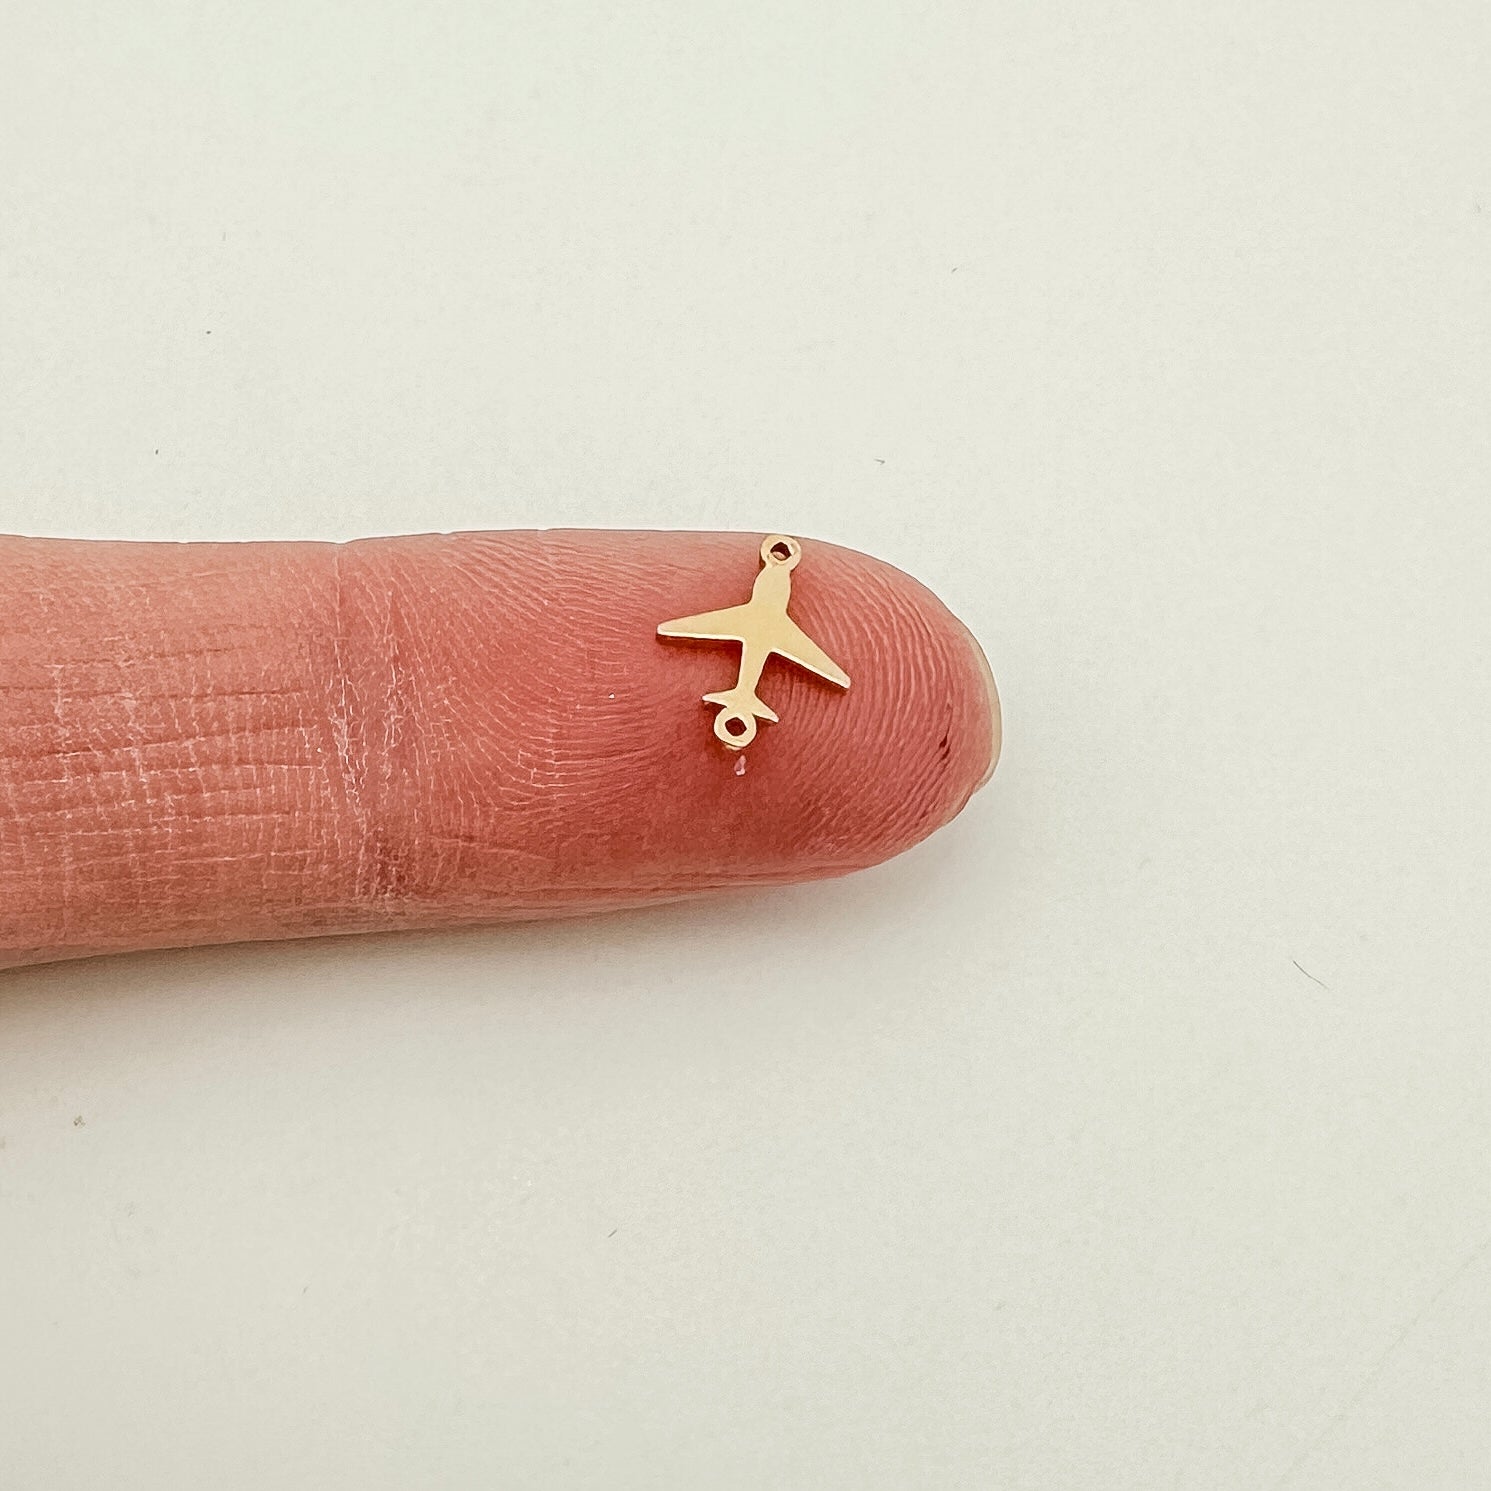 gold filled airplane connector, gold filled connectors, permanent jewelry connectors, essbe jewelry supply, permanent jewelry supplier, airplane charm, airplane connector, sterling silver airplane charm